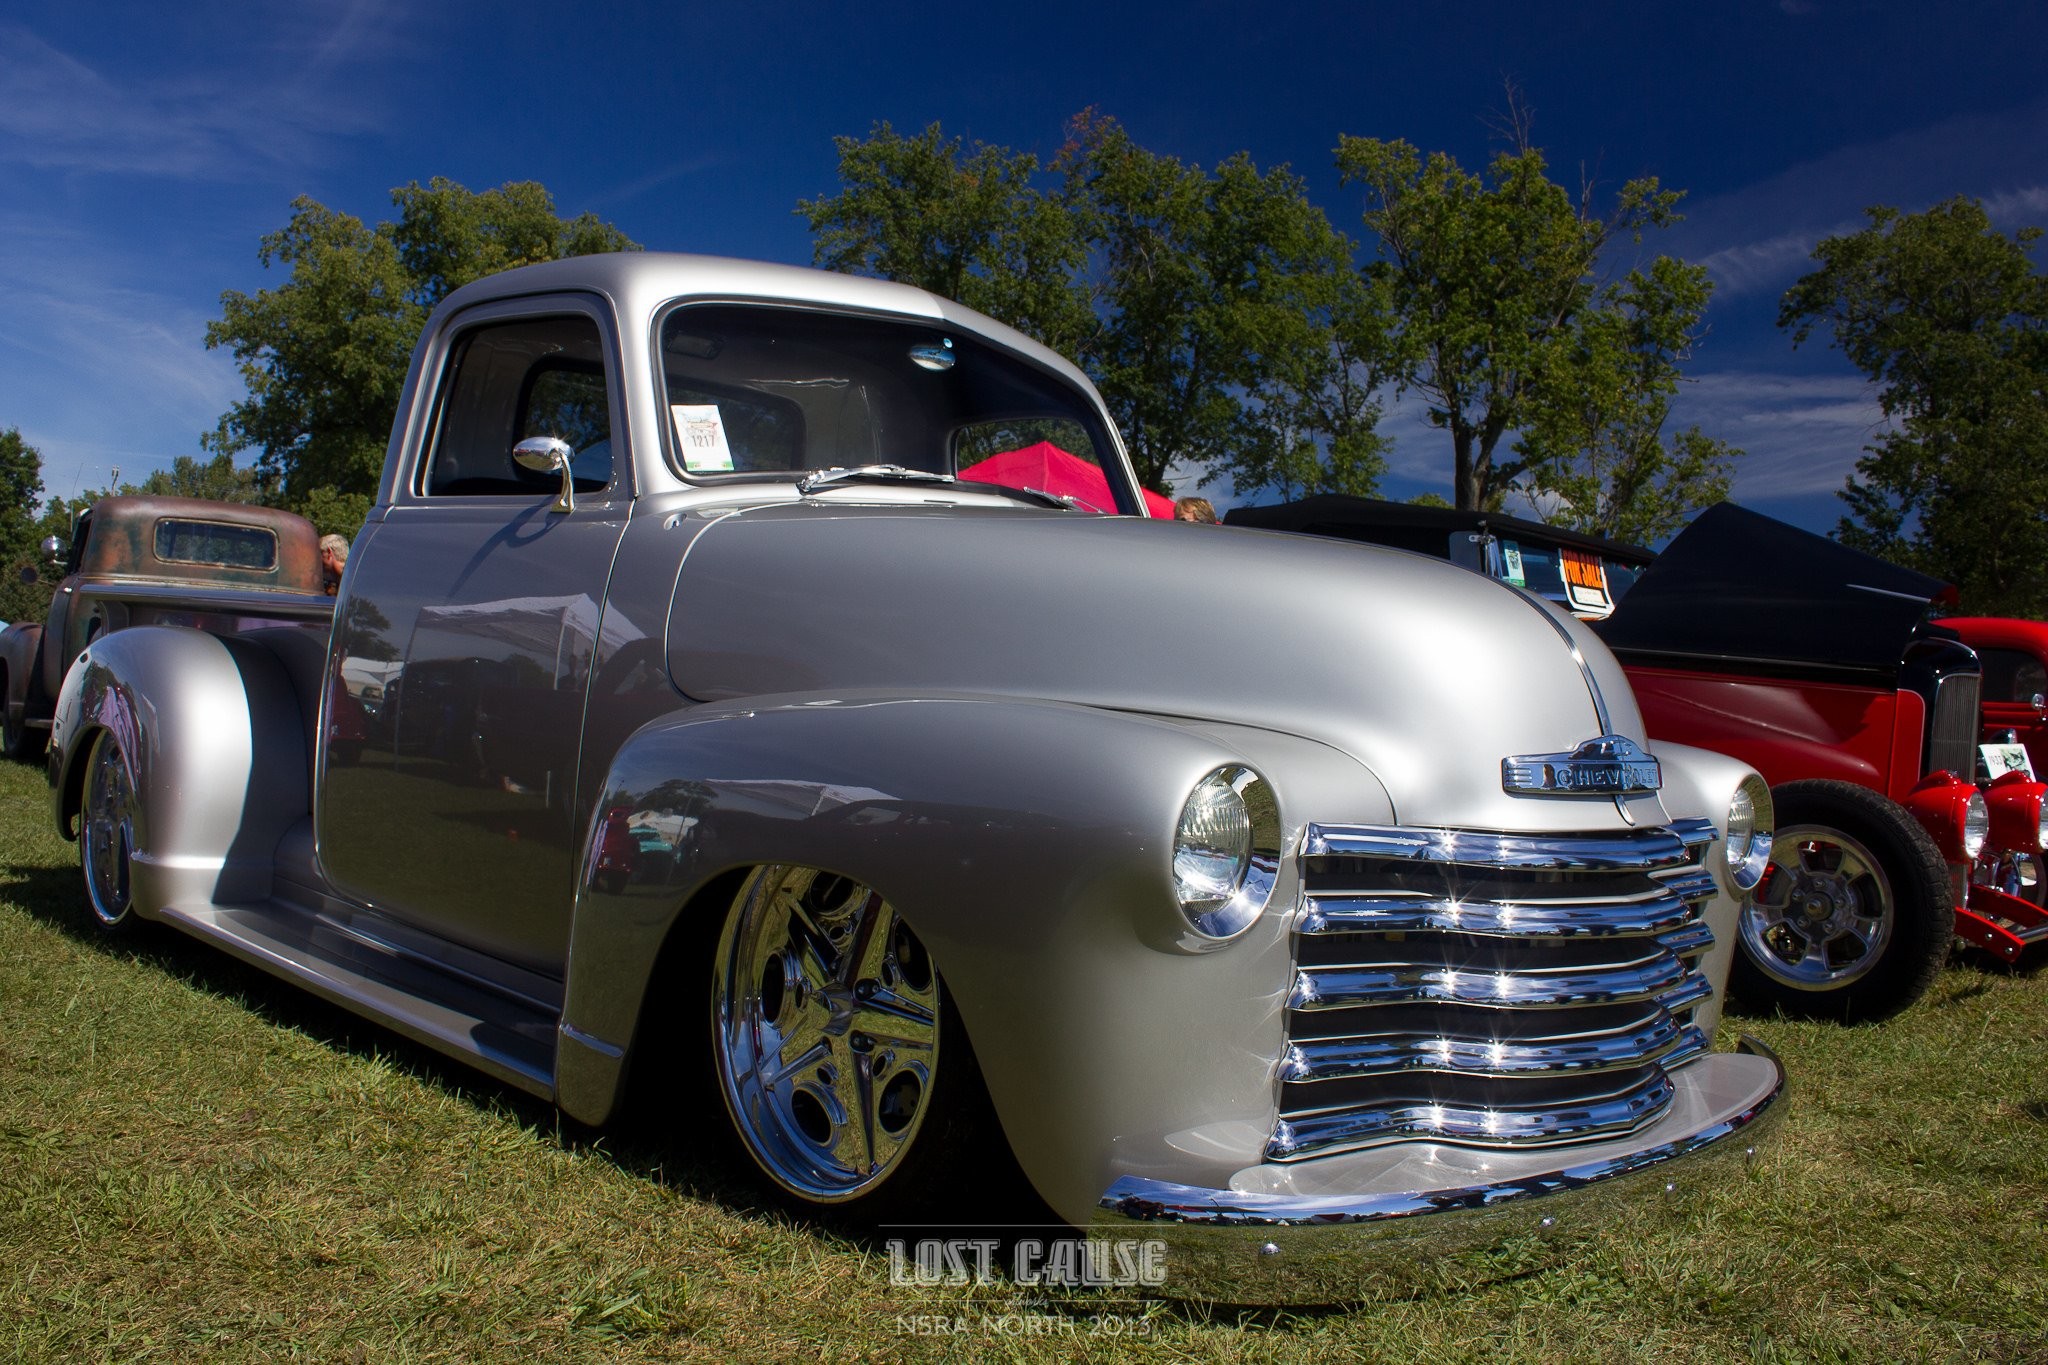 2048x1365 Chevrolet chevy old classic custom cars truck Pickup wallpaper |   | 678429 | WallpaperUP